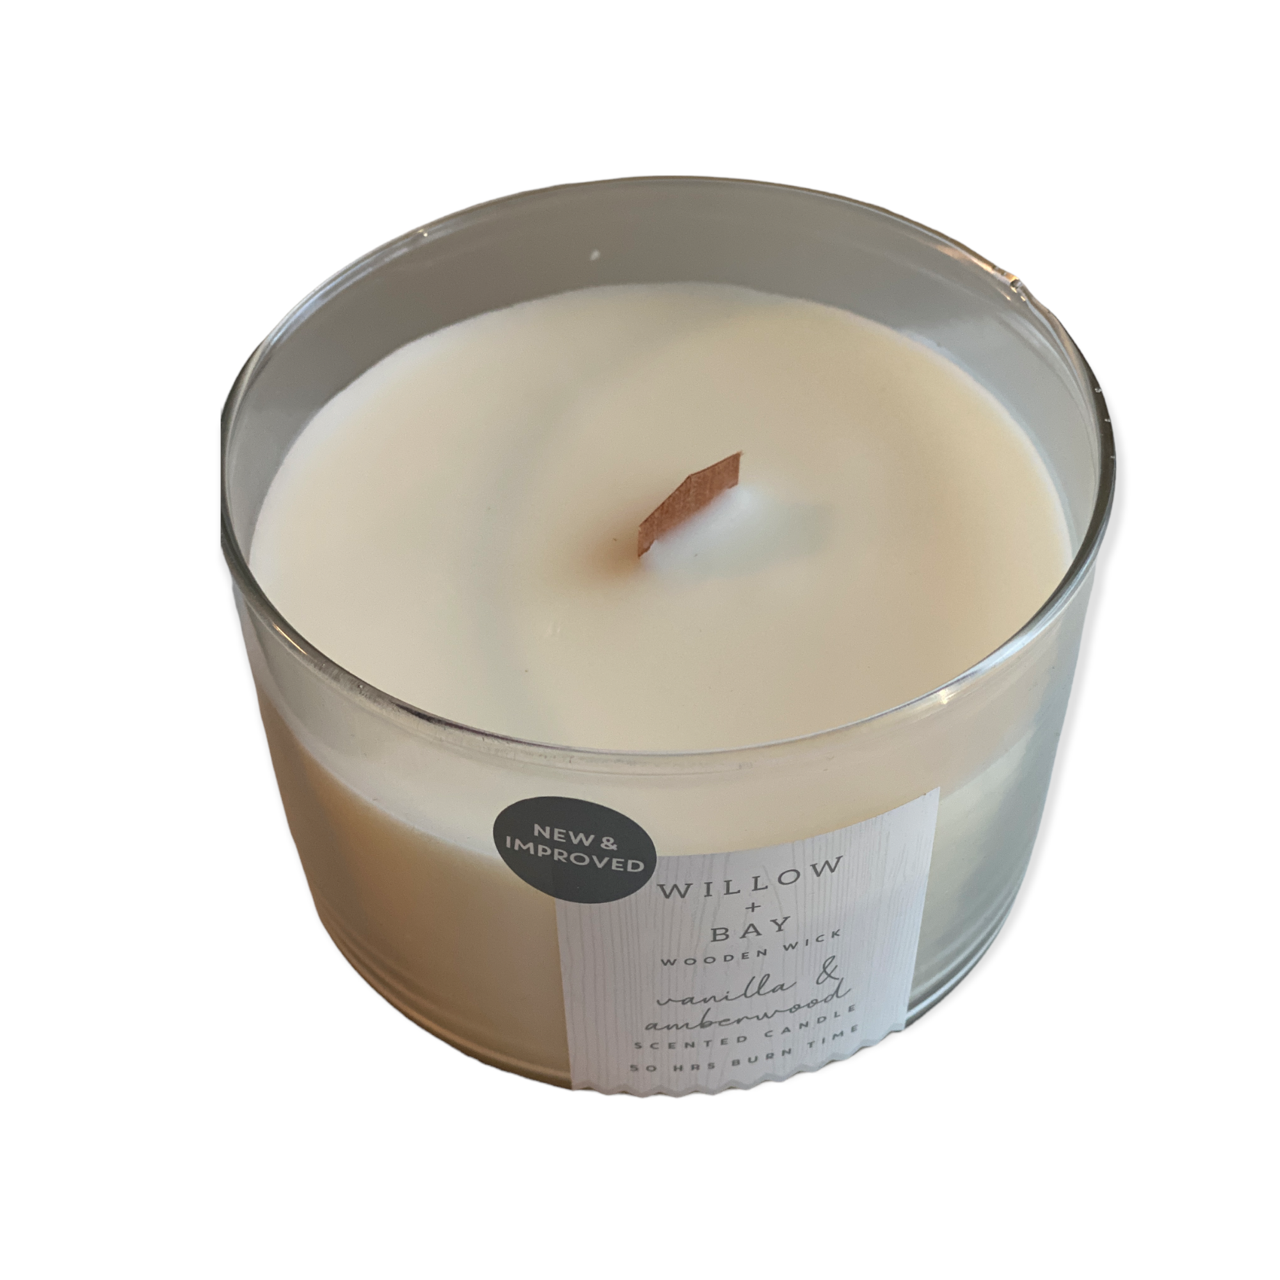 Willow & Bay Luxury Wooden Wick Candle - Vanilla and Amberwood Scented ...